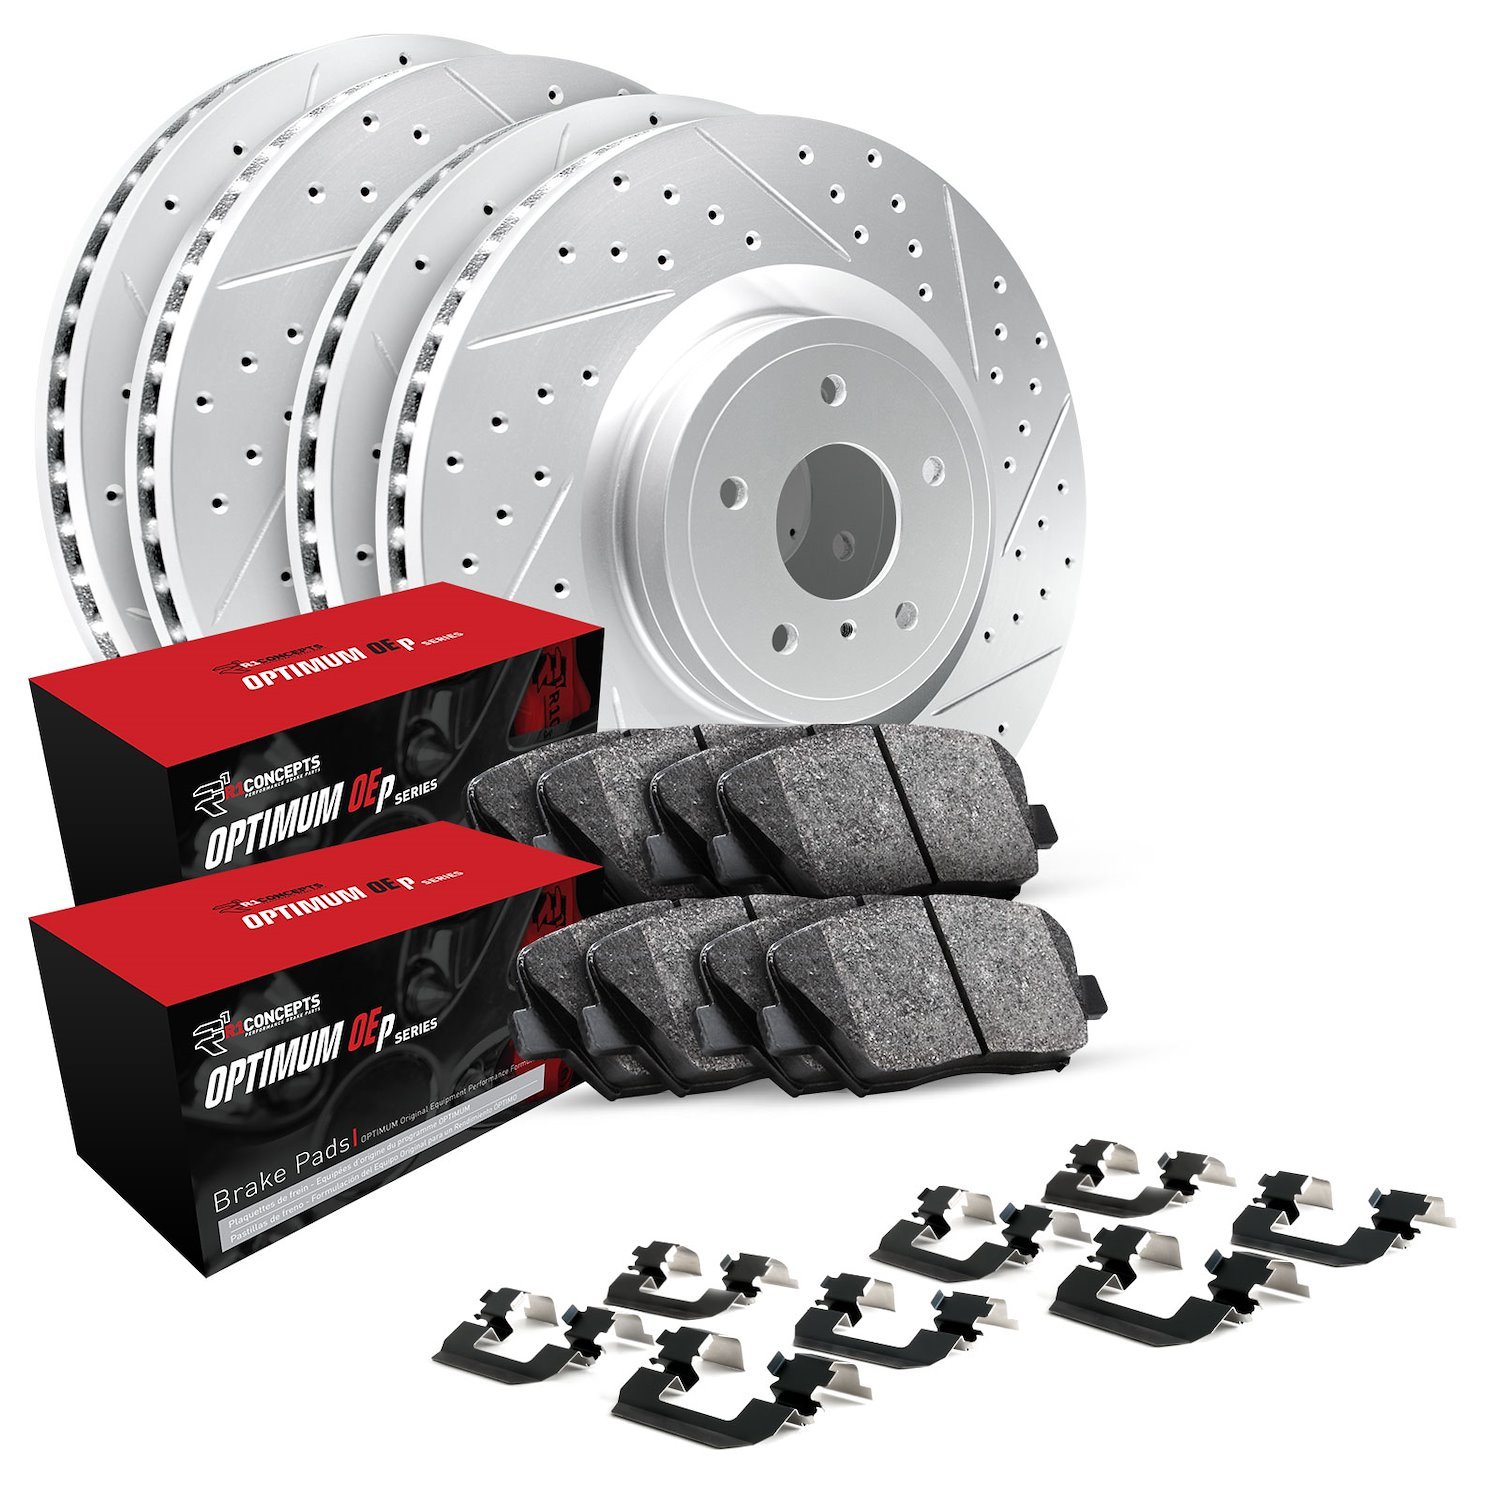 GEO-Carbon Drilled & Slotted Brake Rotor & Drum Set w/Optimum OE Pads, Shoes, & Hardware, 2016-2020 Fits Multiple Makes/Models